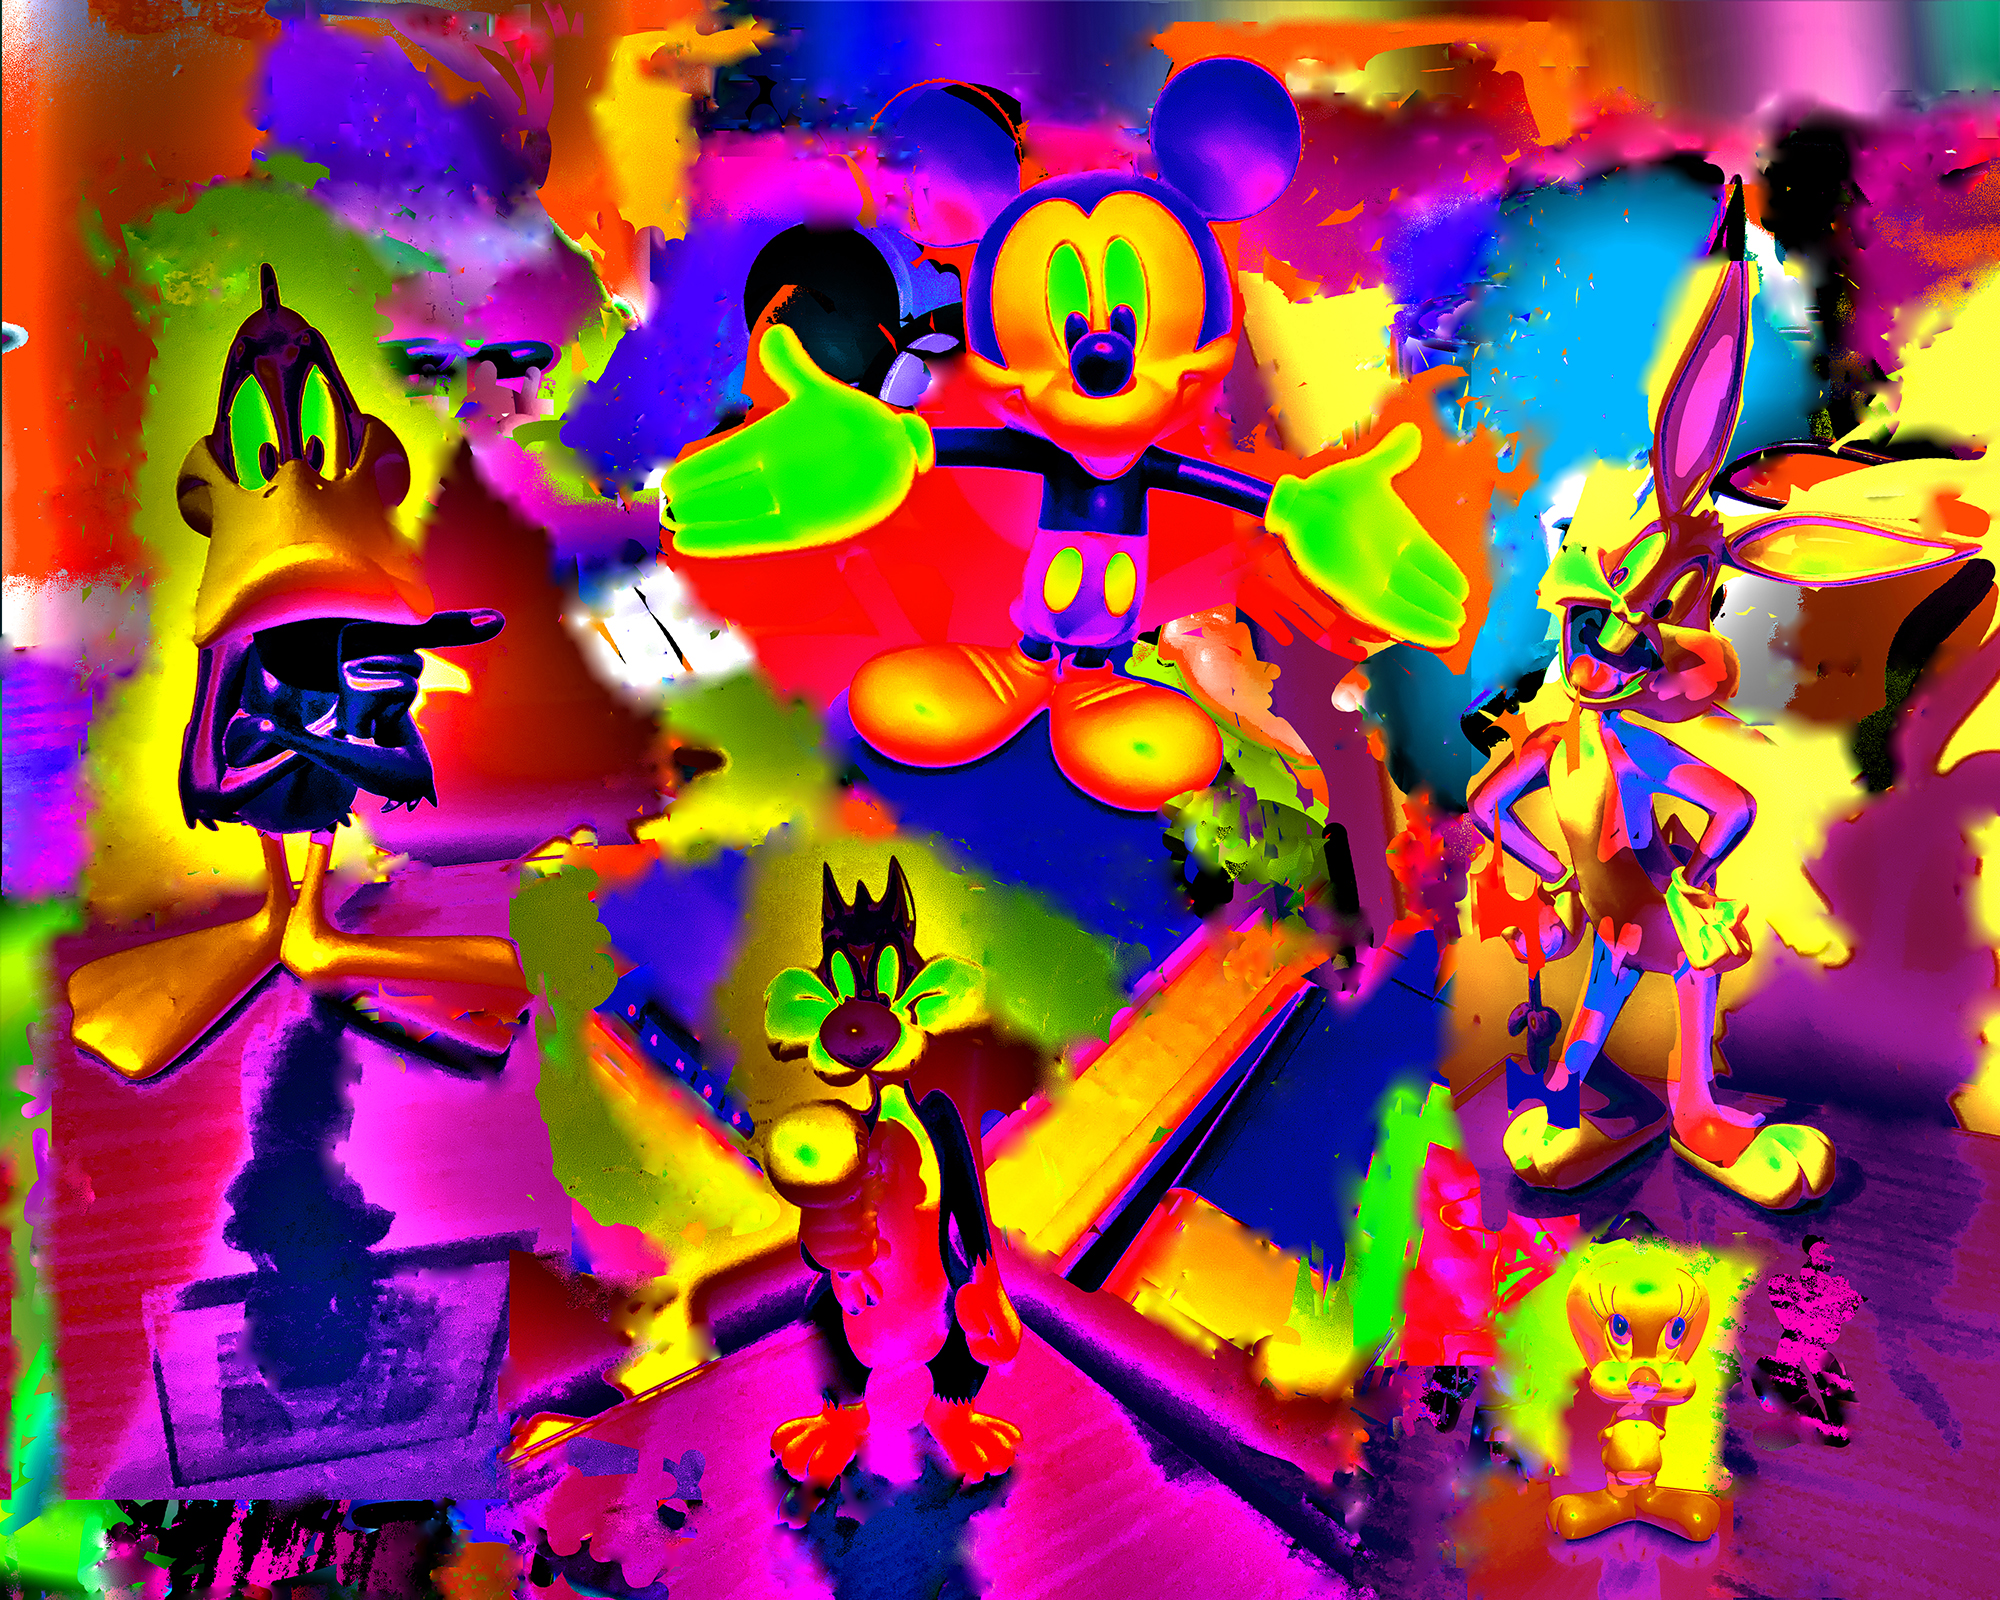 Bright abstract background with Looney Tunes and Mickey Mouse images in the foreground.